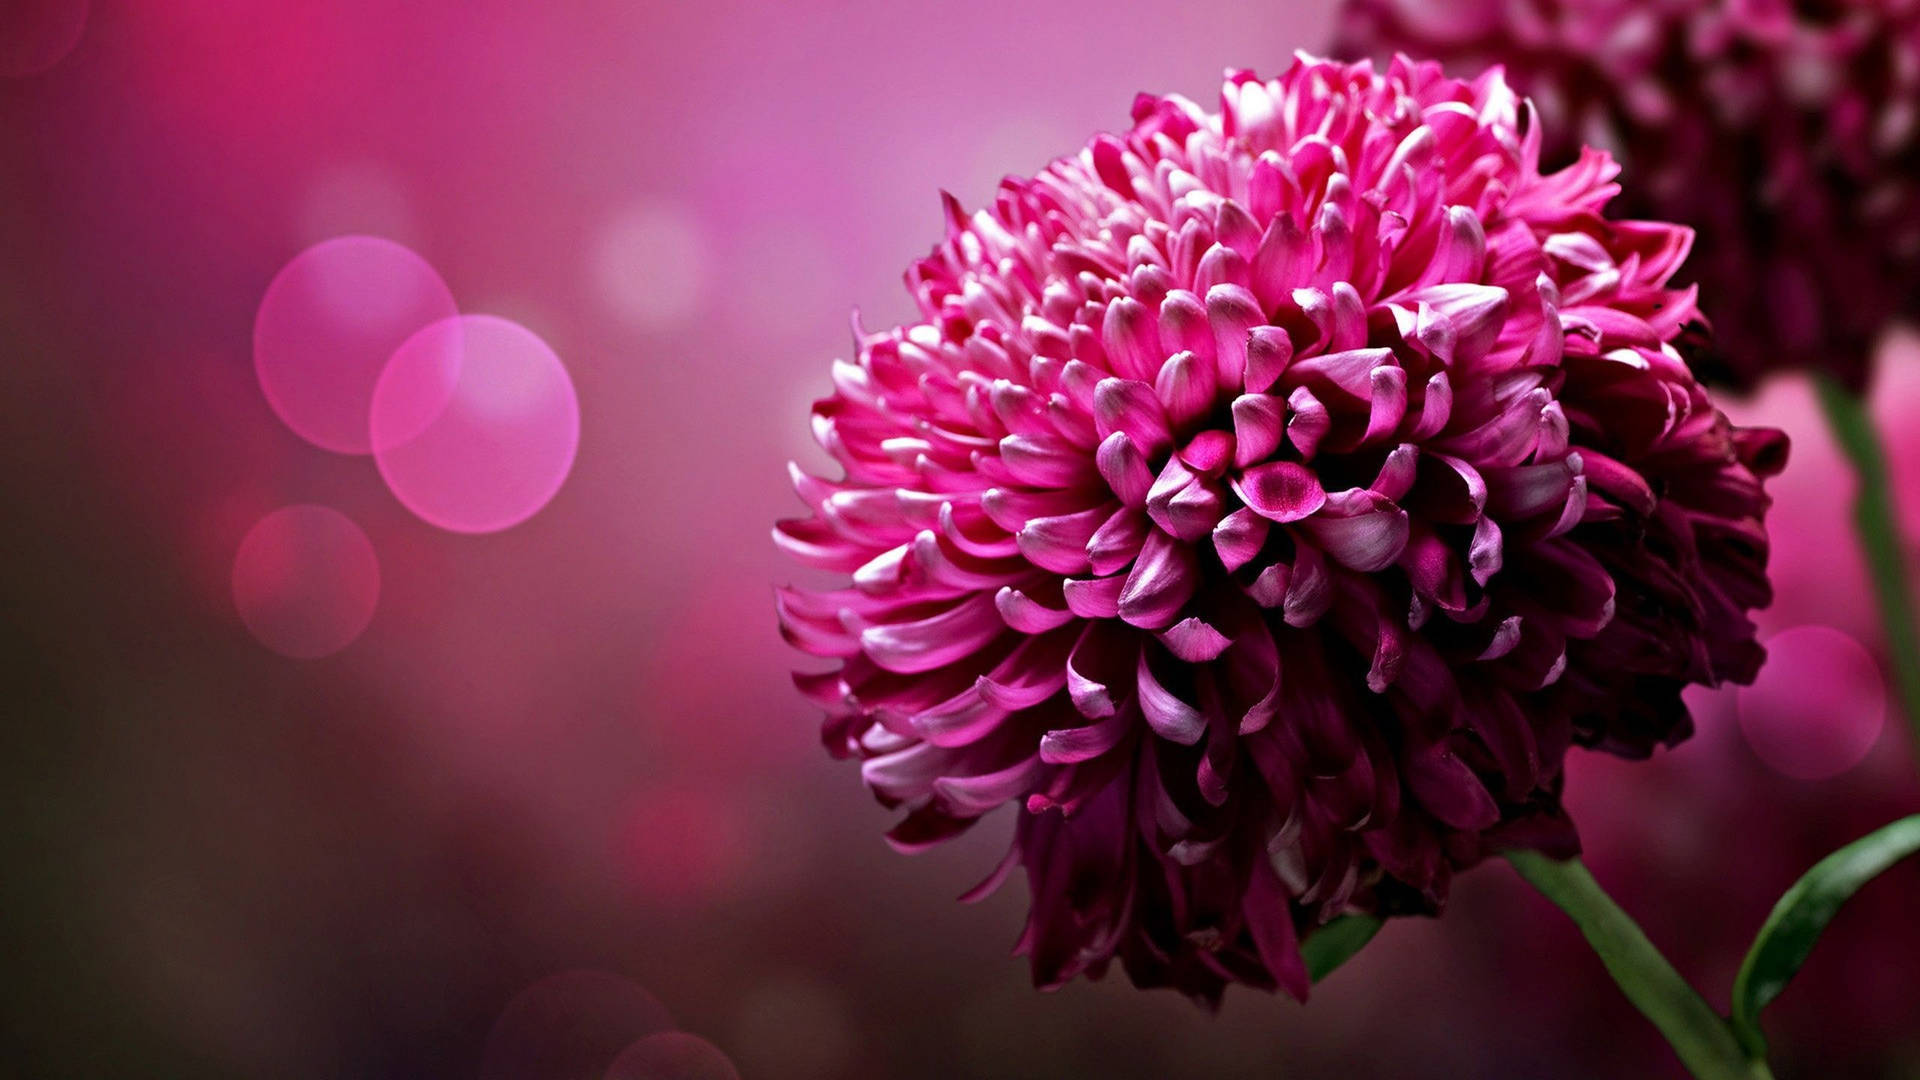 Bokeh Lights And Cute Pink Flower Background